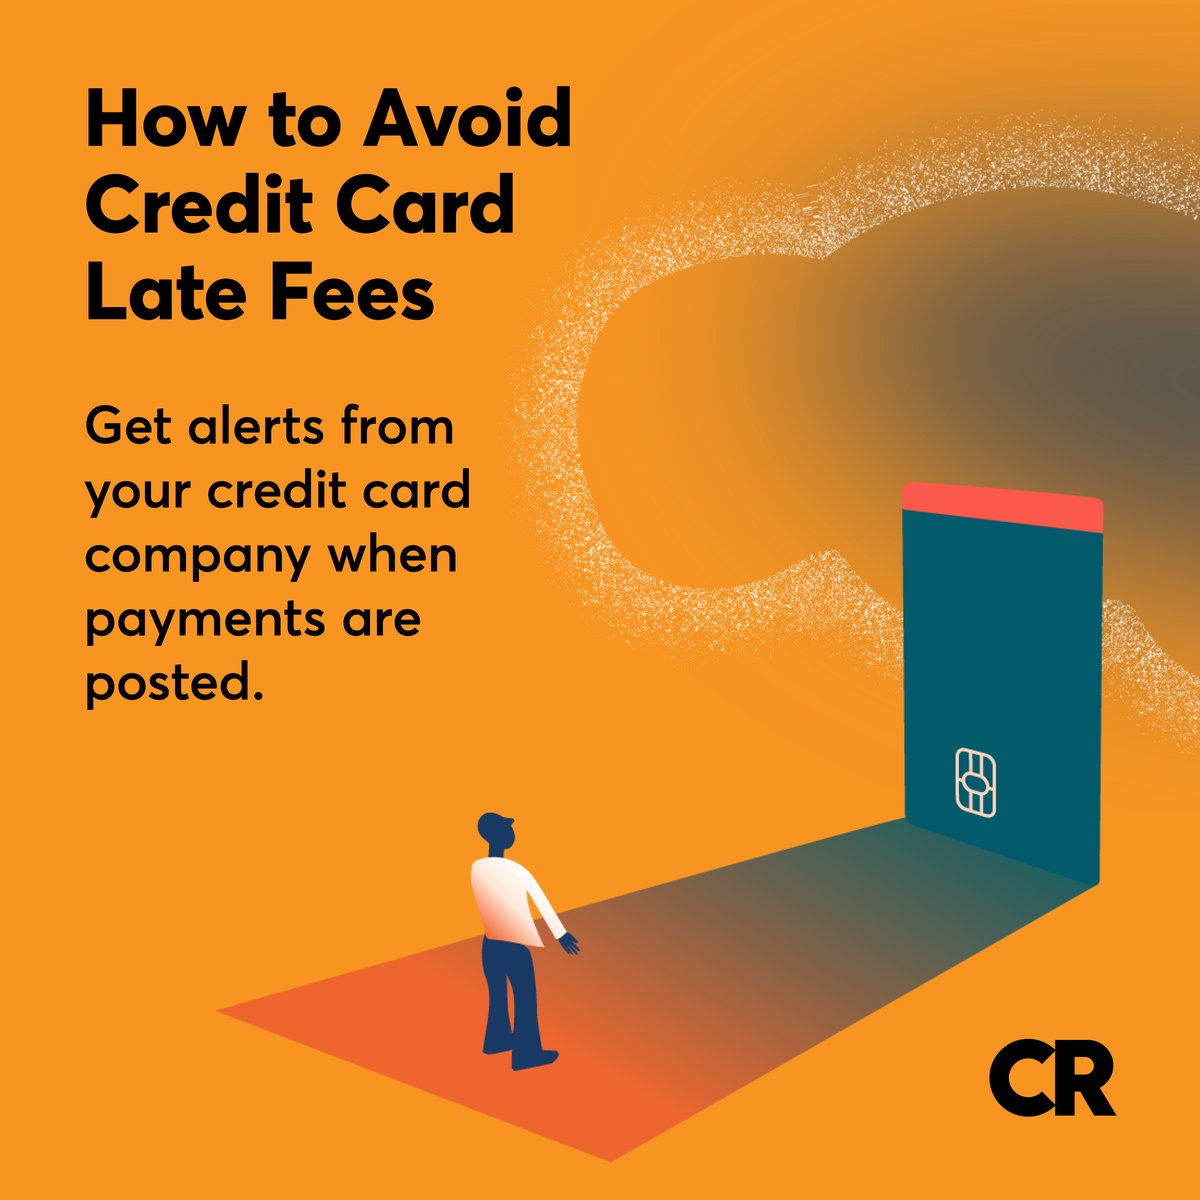 One way to avoid the hassle of late fees is to set up an alert to notify you of your credit card activity, including each purchase you make and when your monthly payment goes through. #junkfees #whatthefee 

See more tips here: consumerreports.org/money/credit-c…